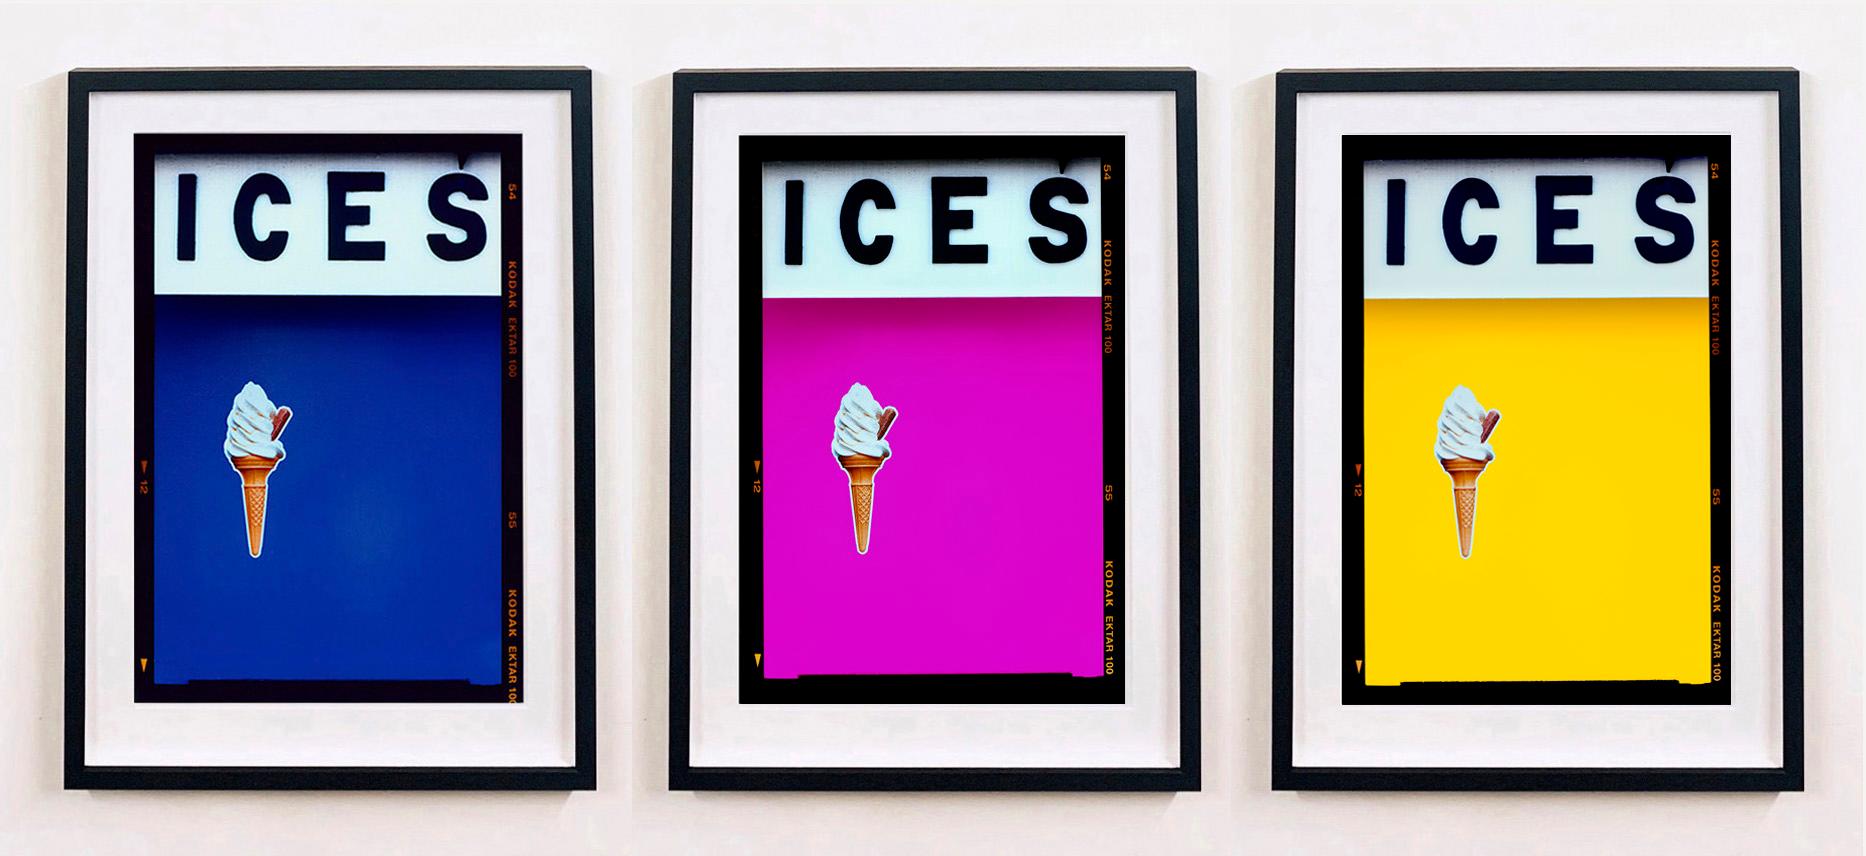 ICES, by Richard Heeps, photographed at the British Seaside at the end of summer 2020. This artwork is about evoking memories of the simple joy of days by the beach. The bold yellow color blocking, typography and the surreal twist of the suspended